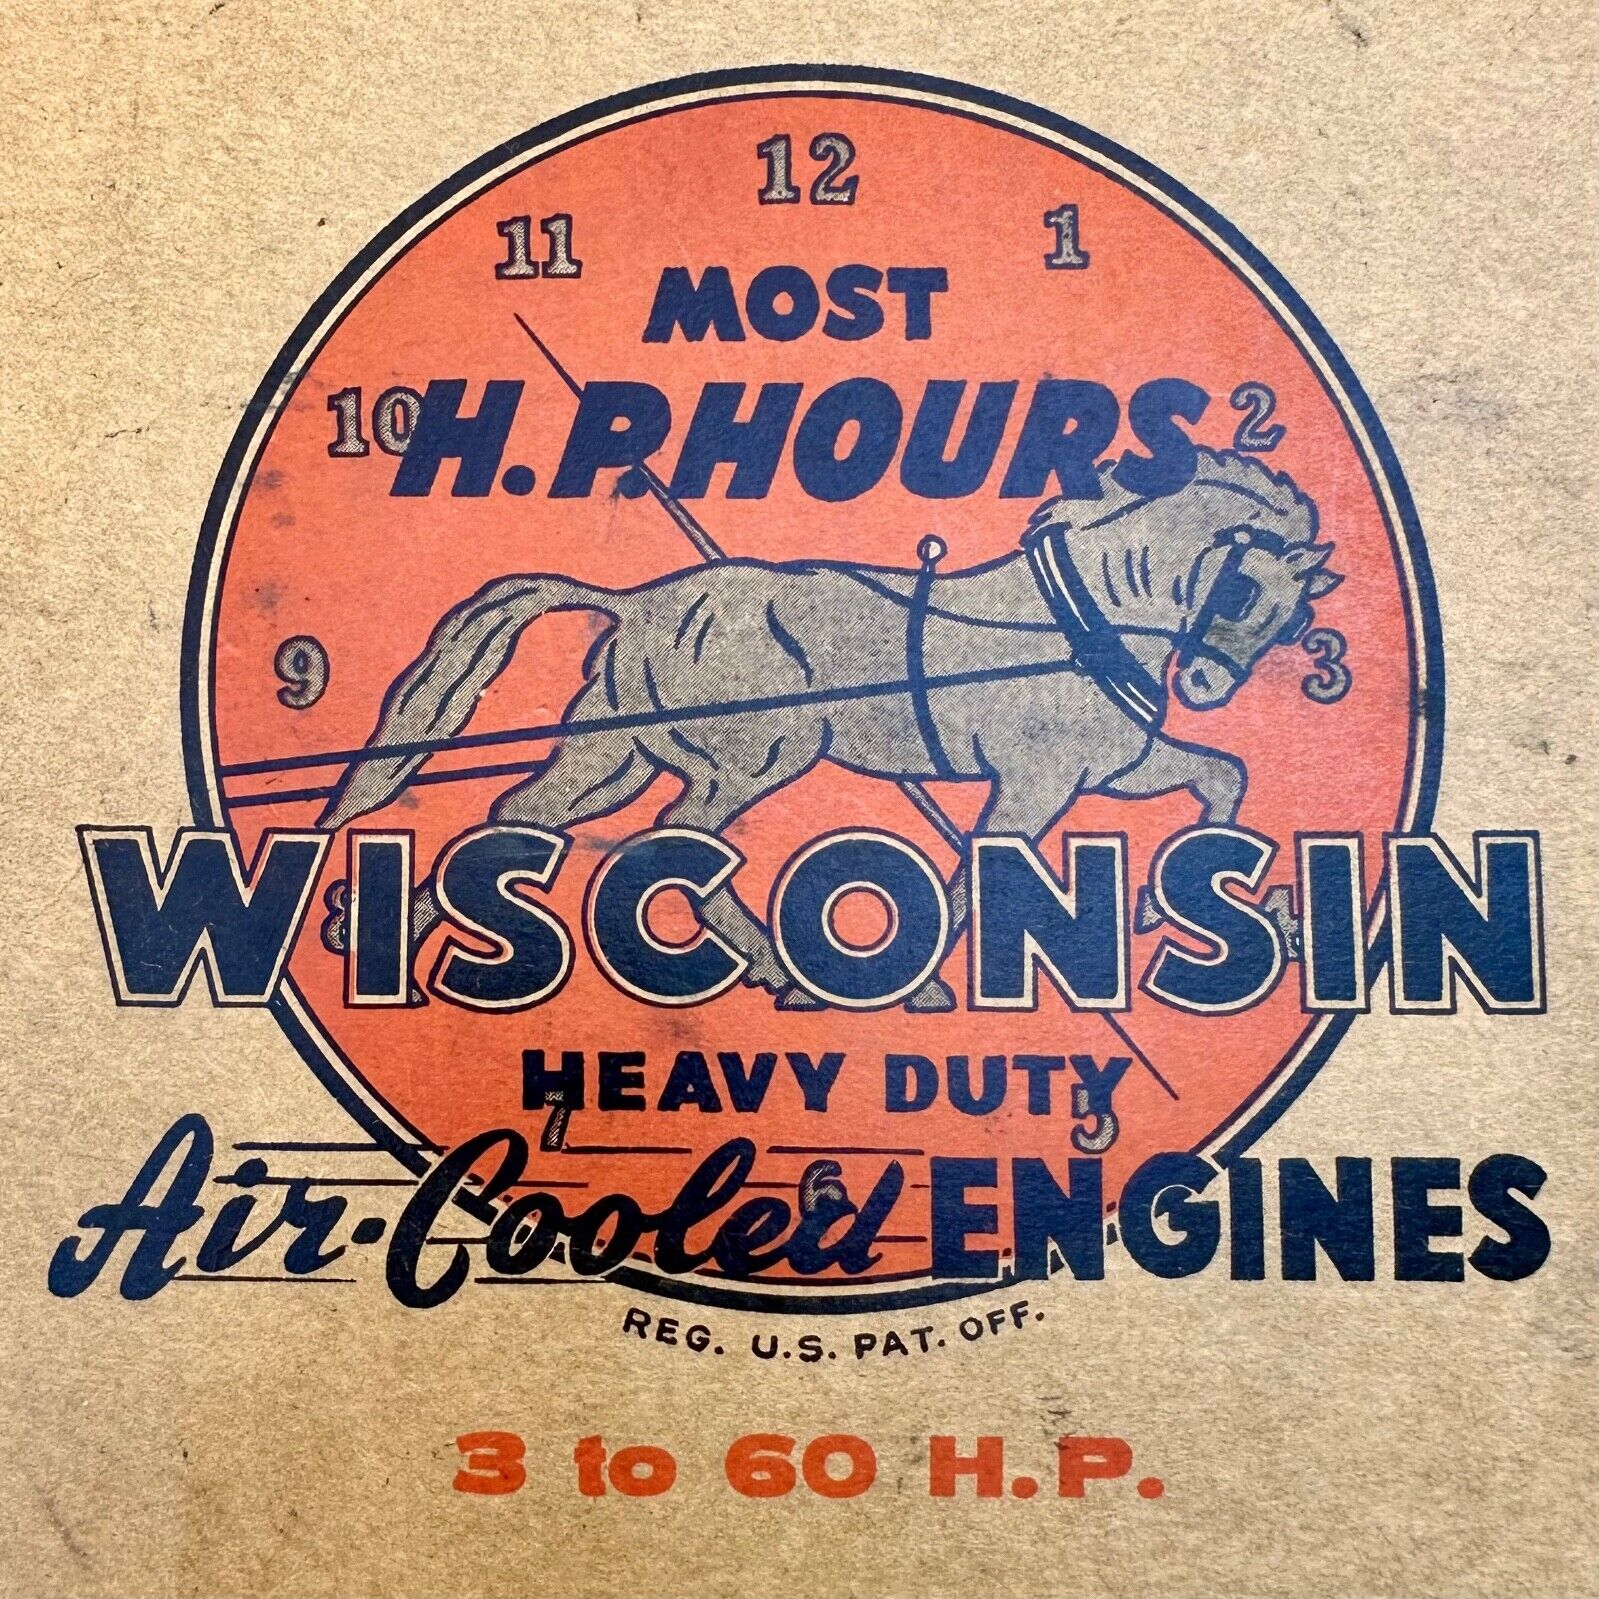 WISCONSIN Heavy Duty Air-Cooled Engines \